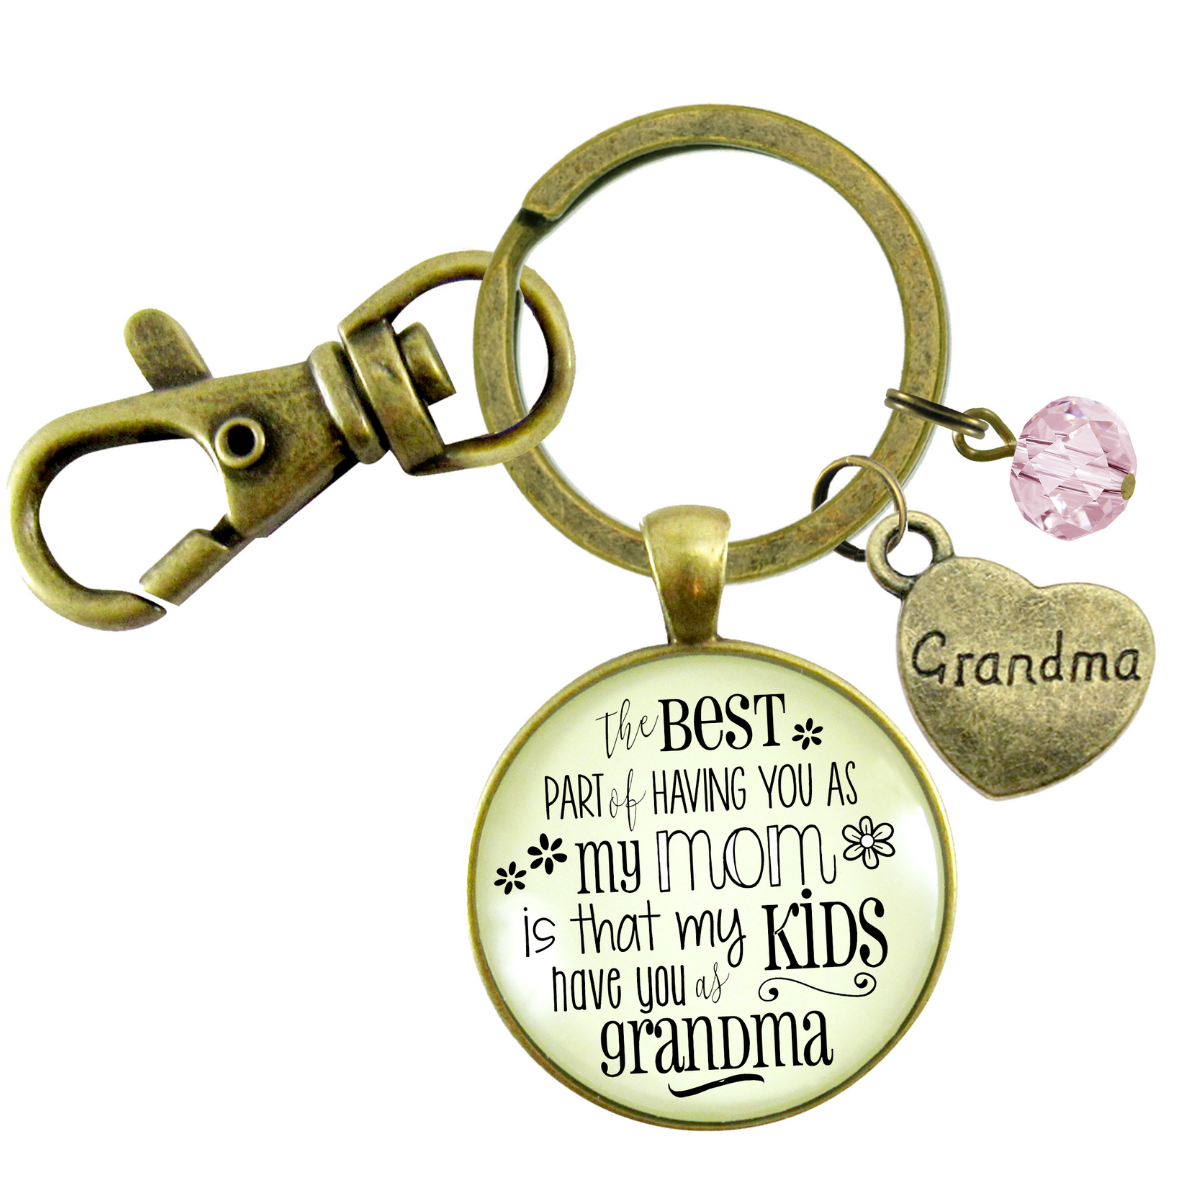 Grandmother Keychain Best Part You As Mom My Kids Grandma Jewelry Gift From Daughter - Gutsy Goodness Handmade Jewelry;Grandmother Keychain Best Part You As Mom My Kids Grandma Jewelry Gift From Daughter - Gutsy Goodness Handmade Jewelry Gifts